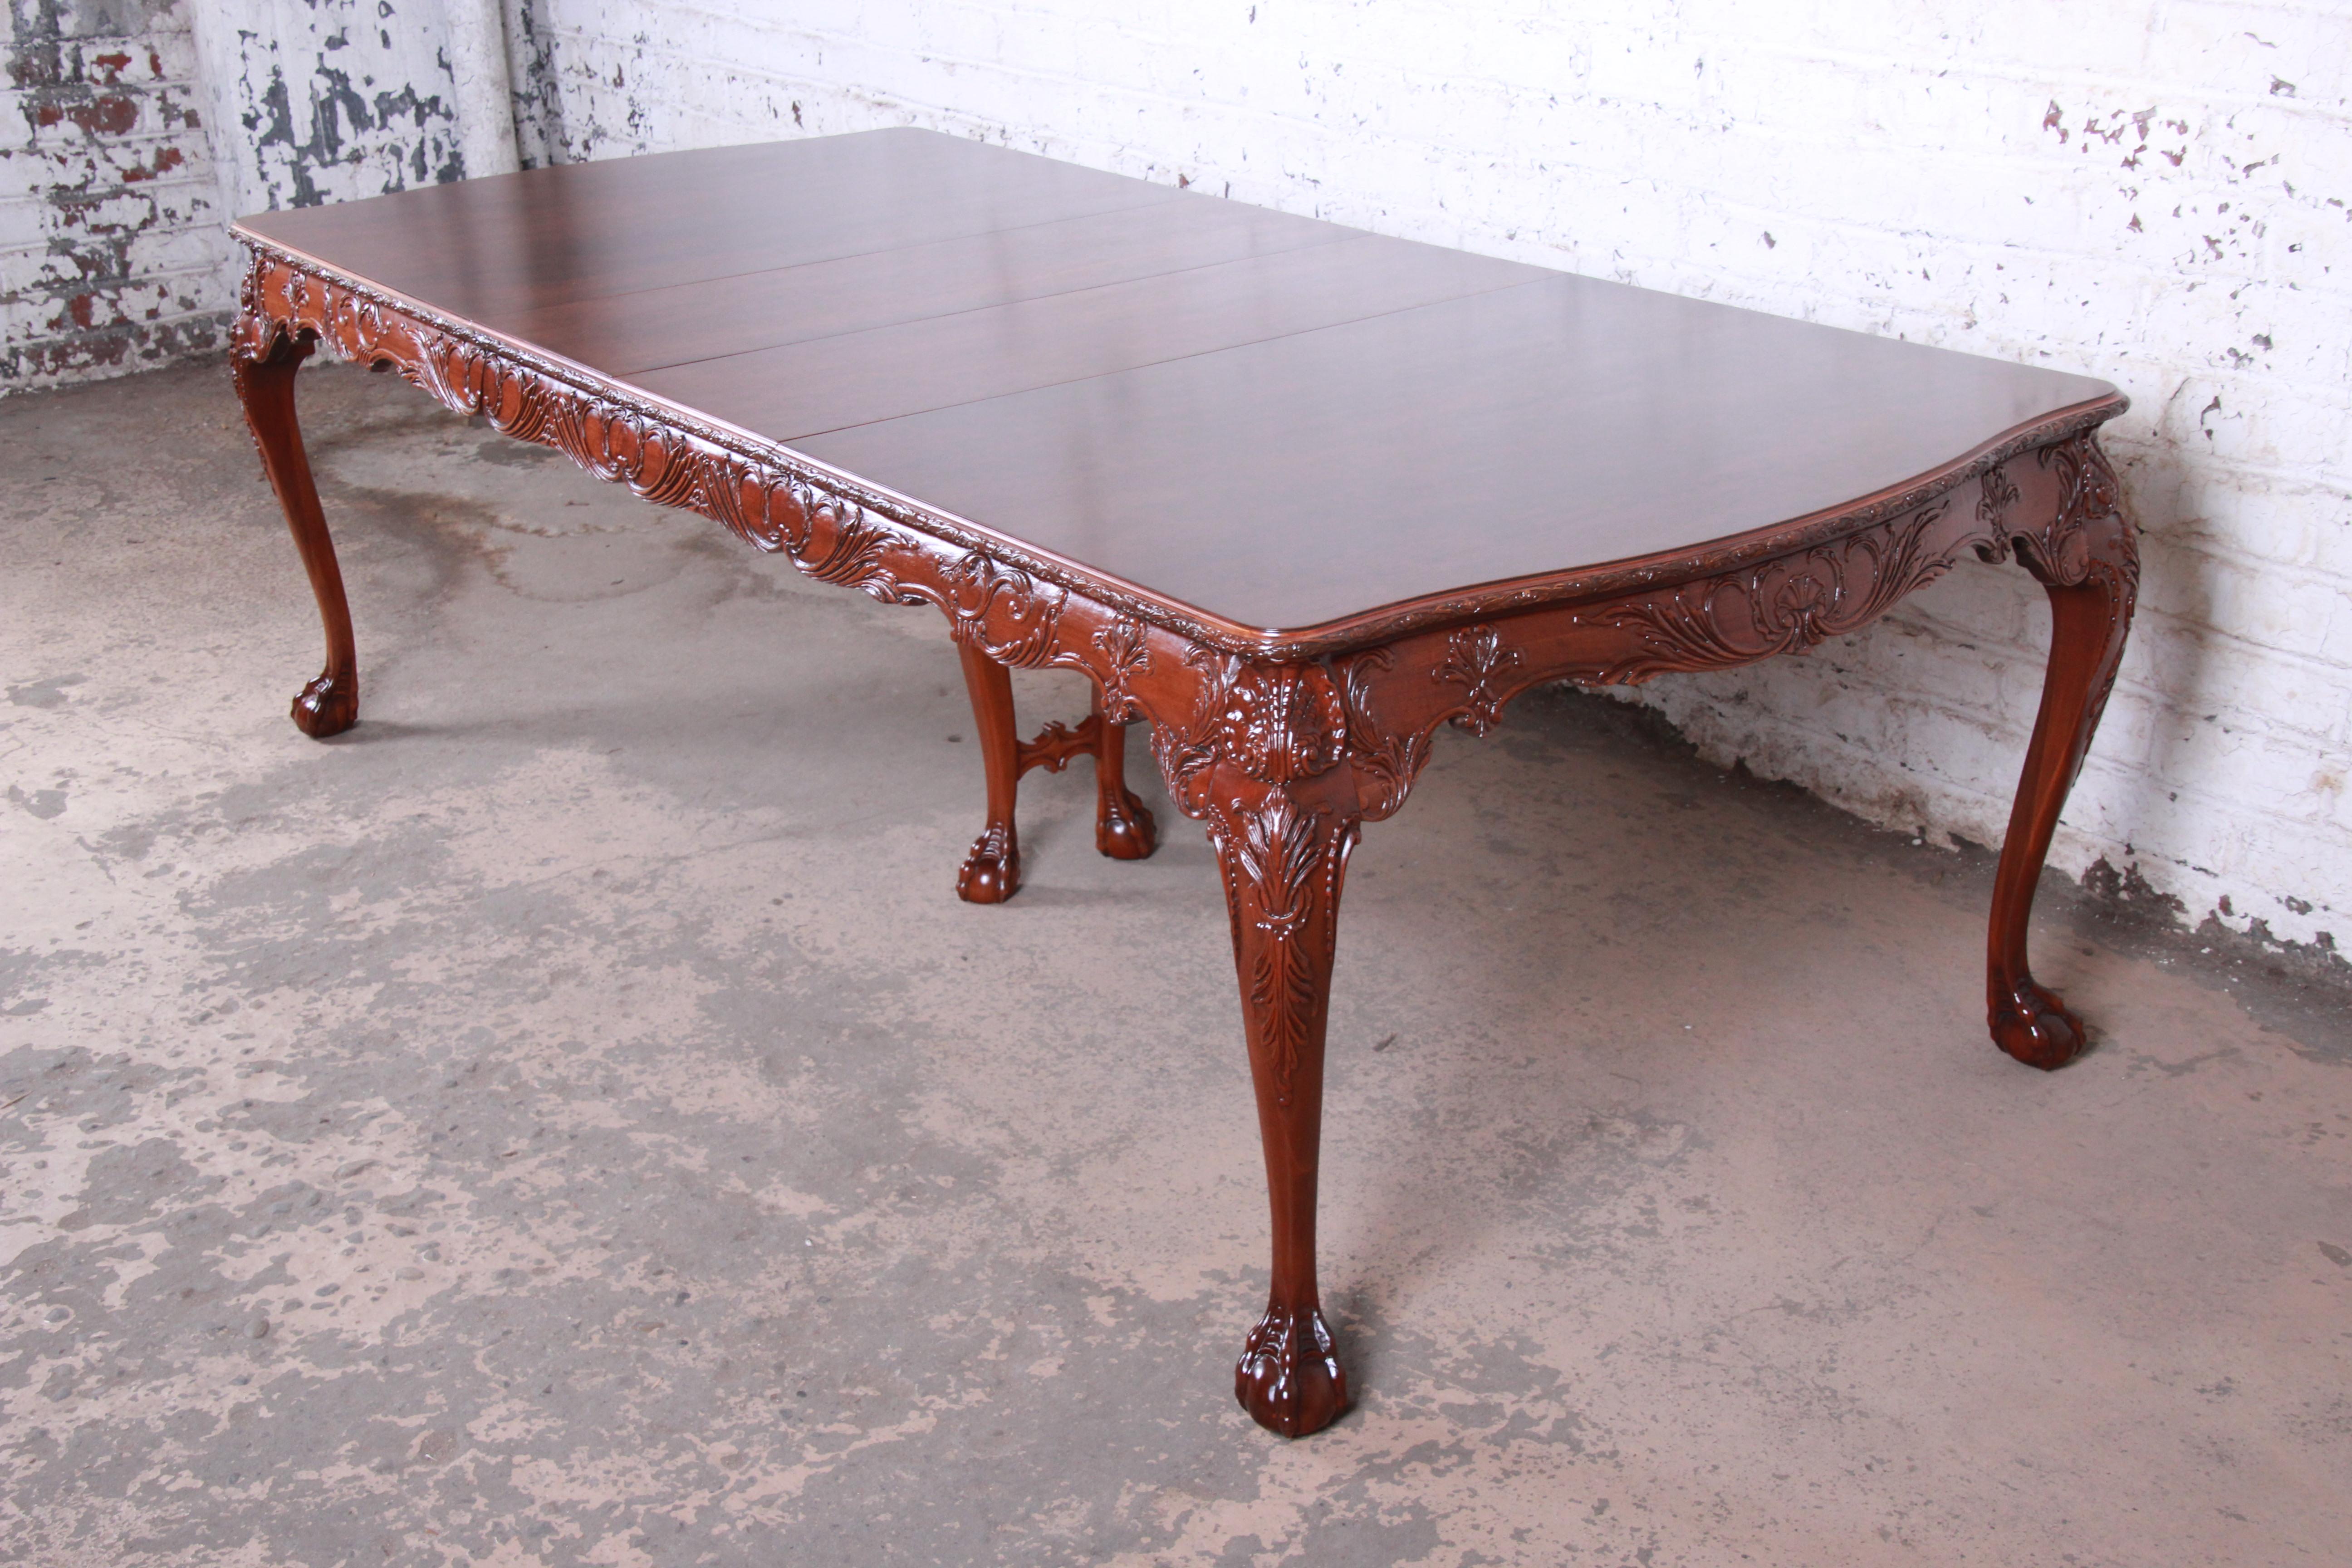 American Romweber Chippendale Ornate Carved Mahogany Extension Dining Table, circa 1920s